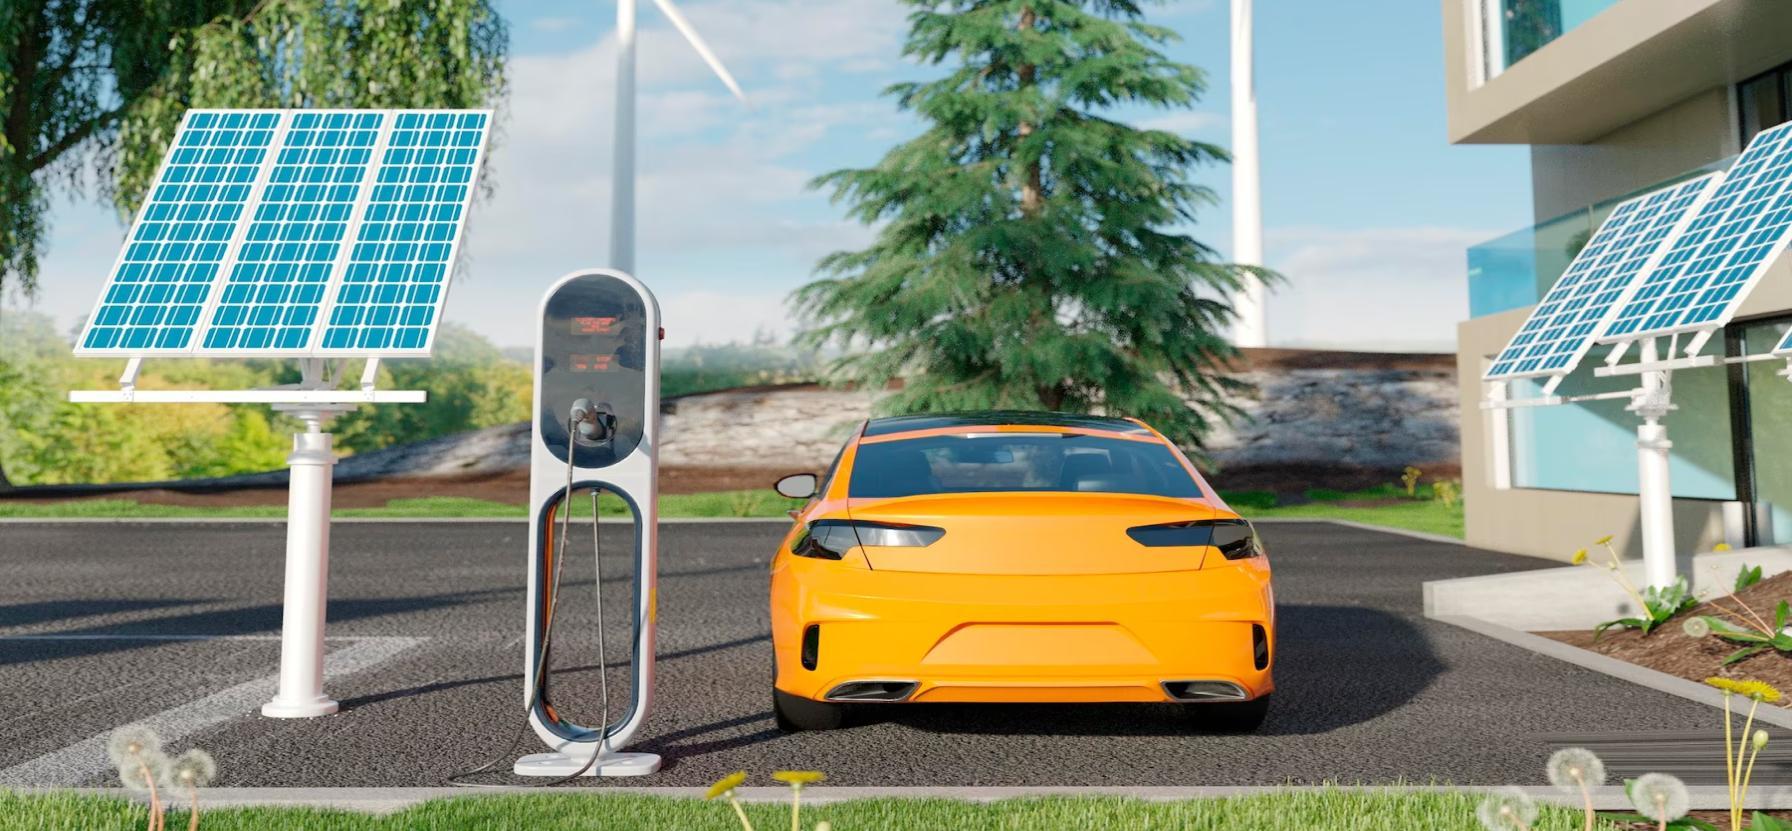 The Expanding Role Of Utilities in EV Transition